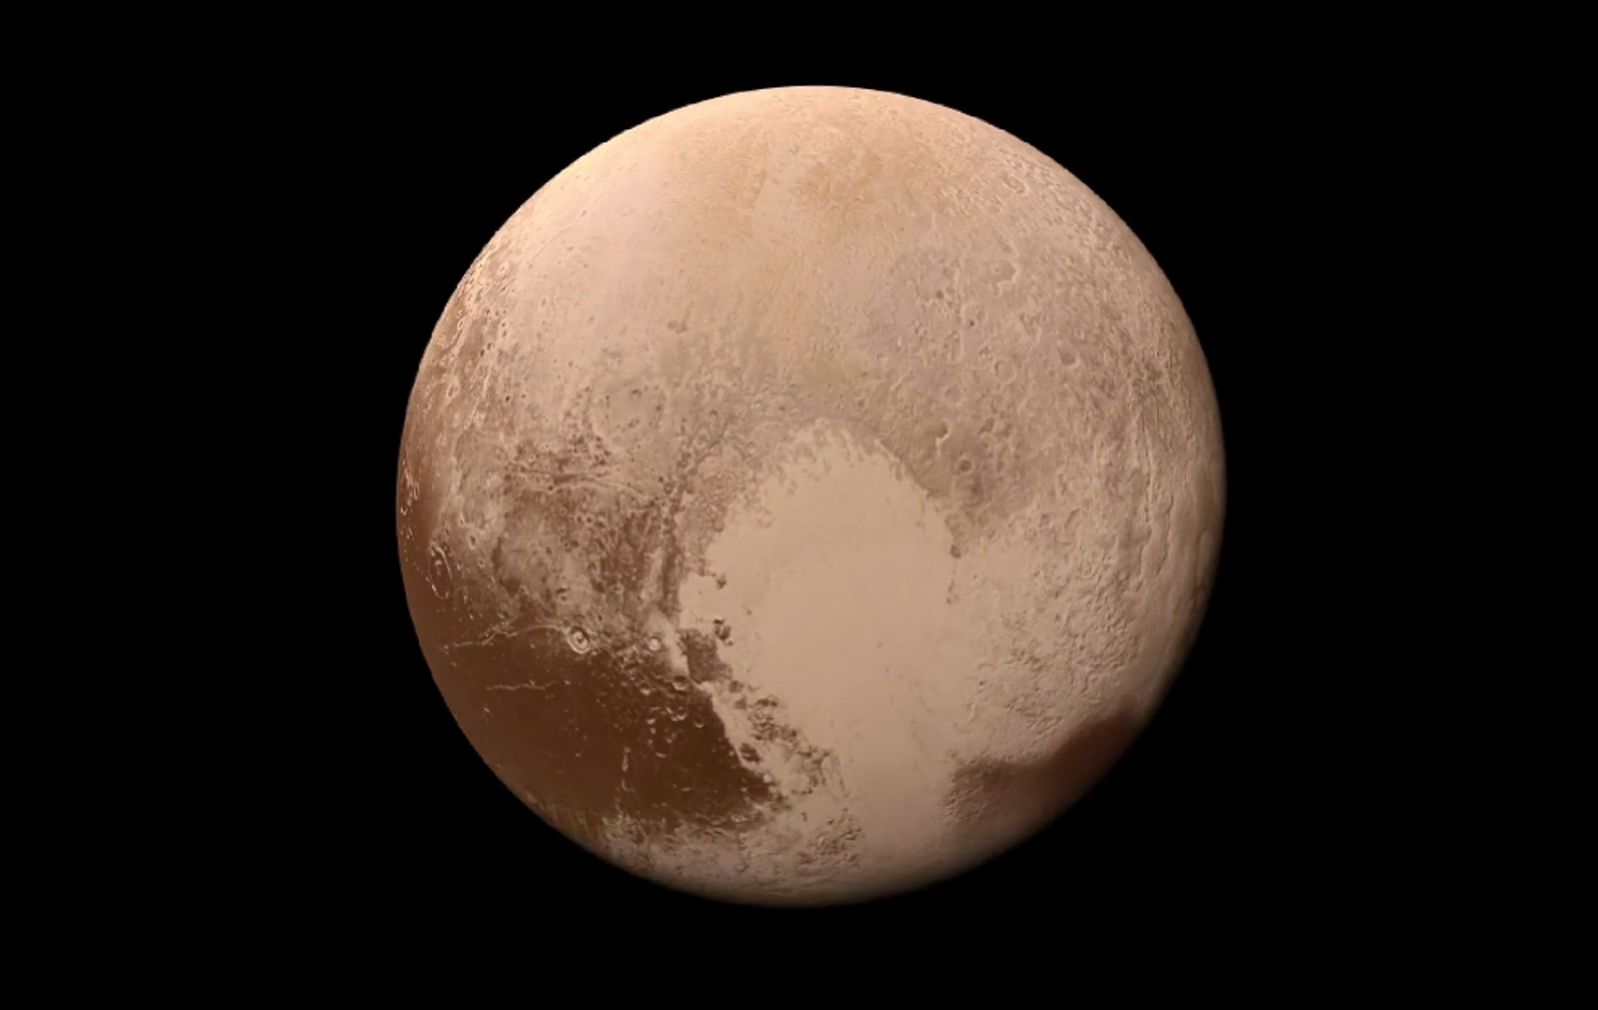 You’ve Got 15 Questions to Prove You Have a Ton of General Knowledge Pluto